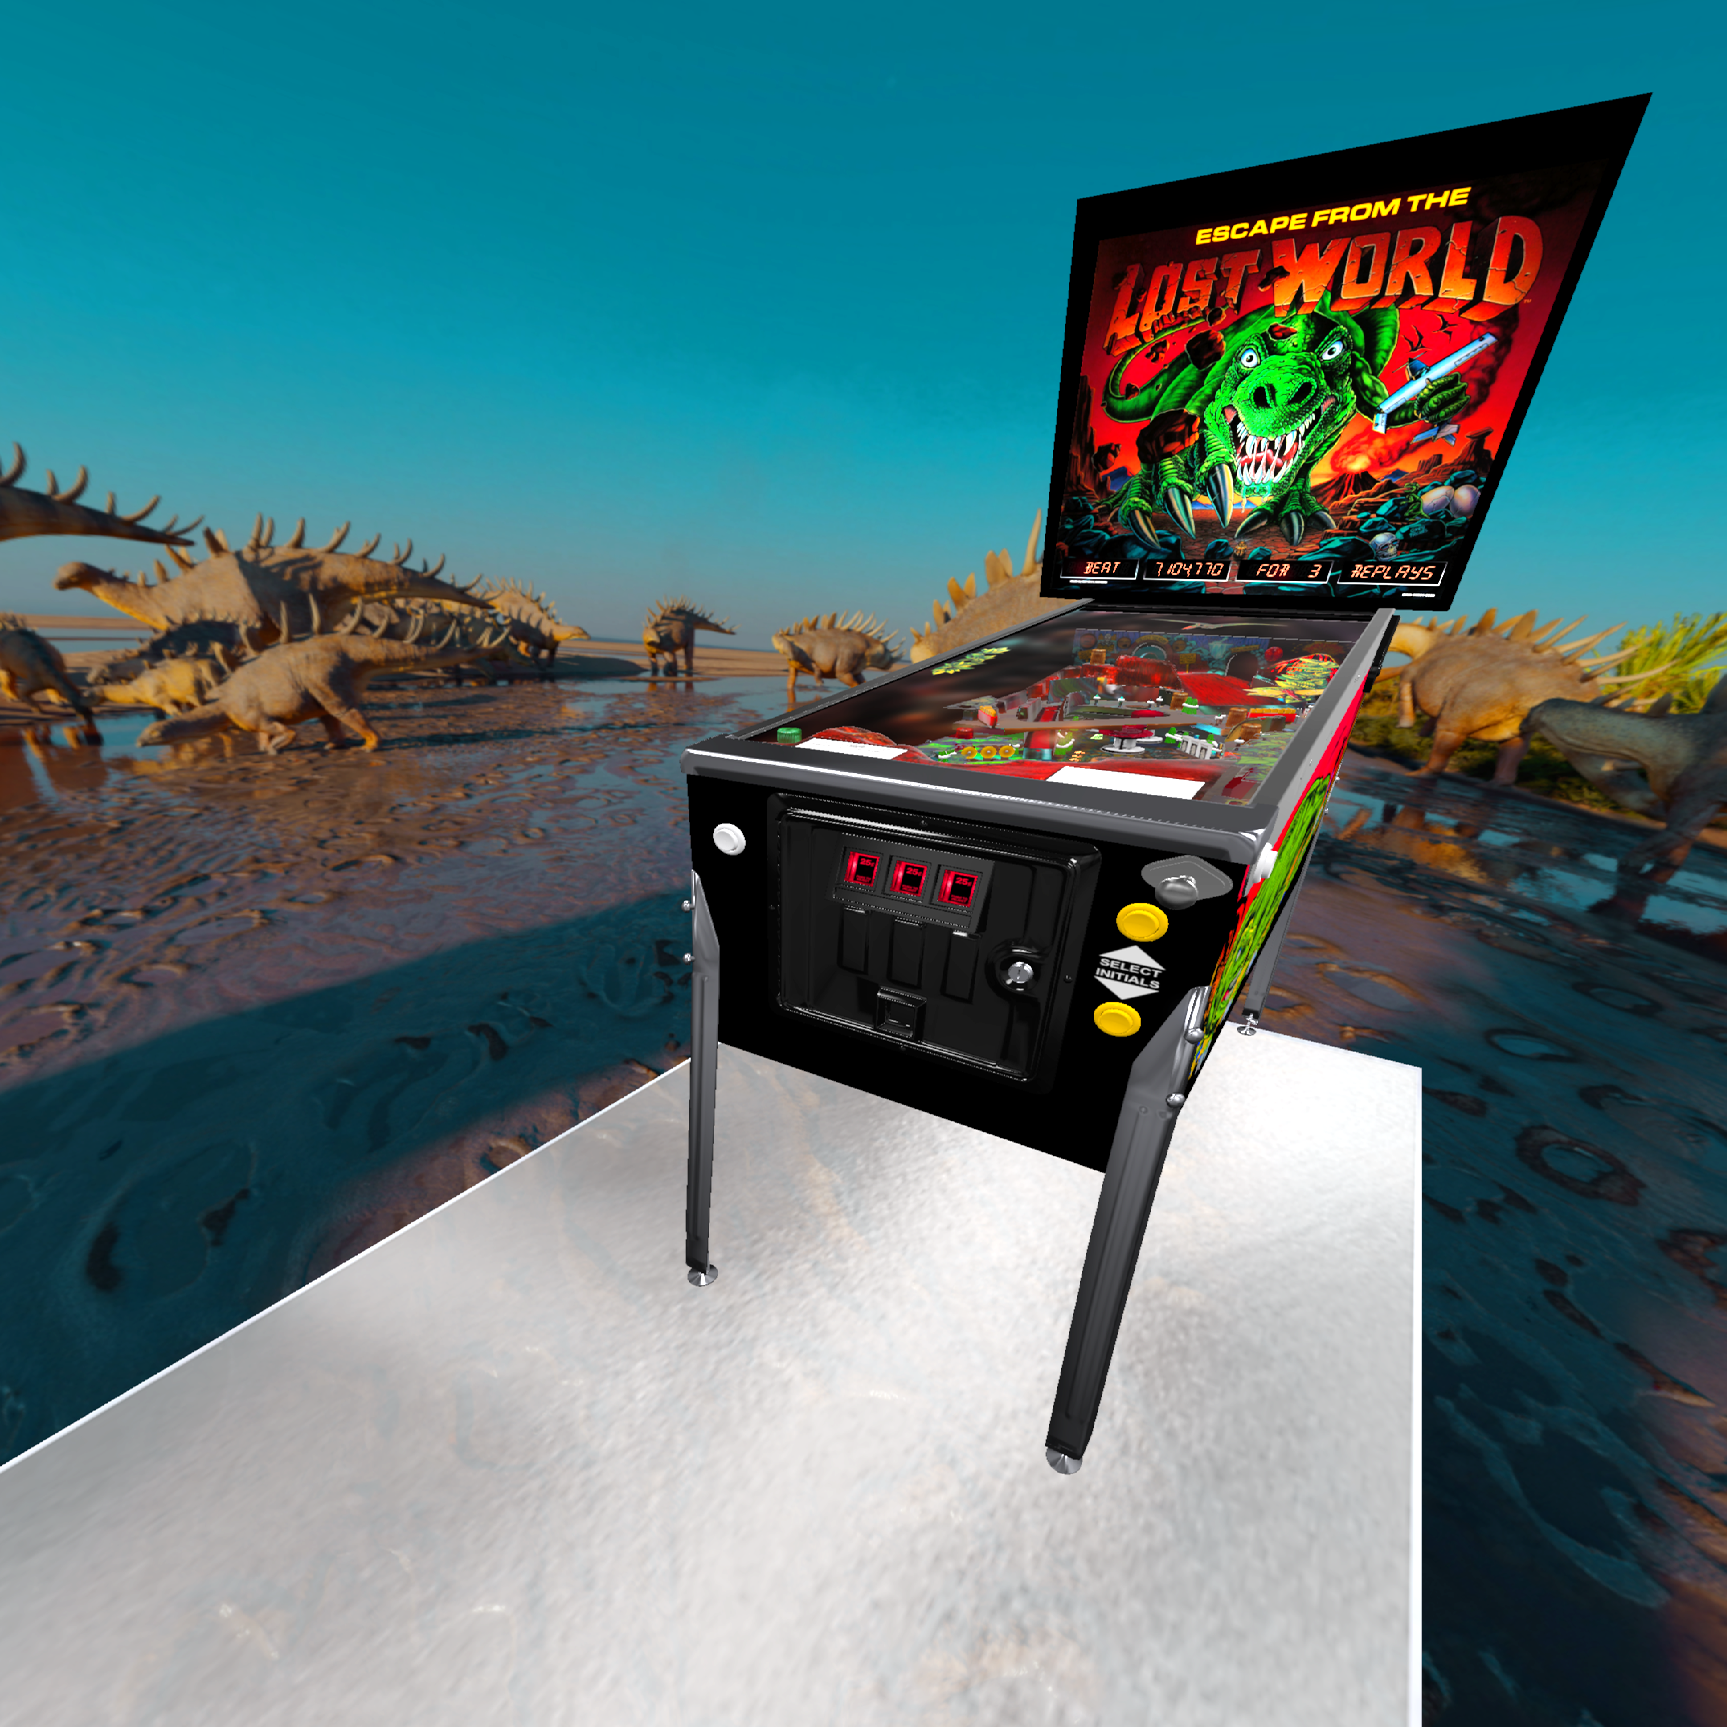 VR Room Escape from the Lost World (Bally 1988)